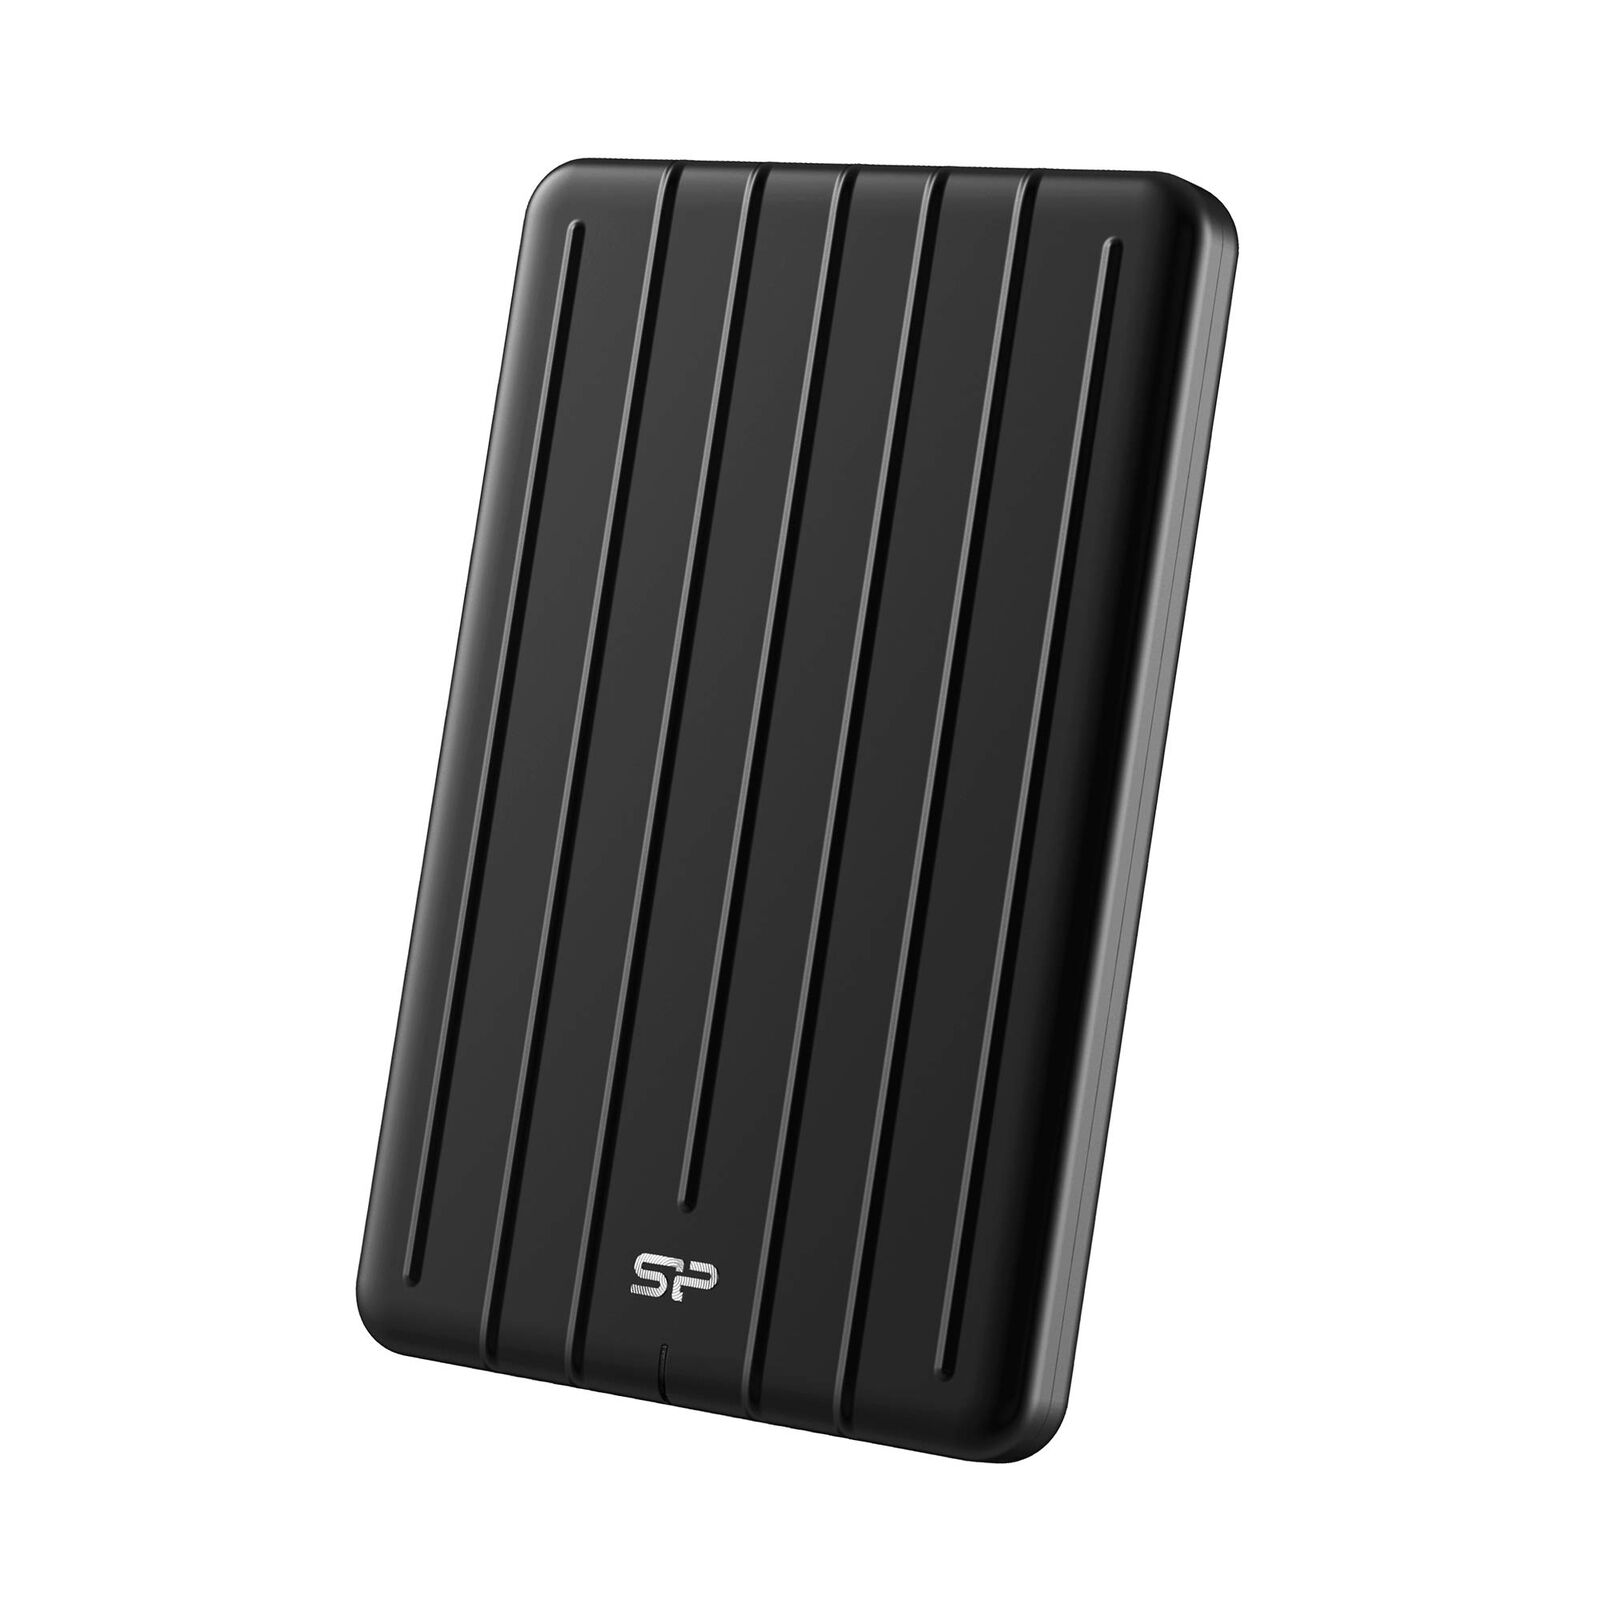 Silicon Power 2TB Rugged Portable External SSD USB 3.2 Gen 2 (USB3.2) with US...